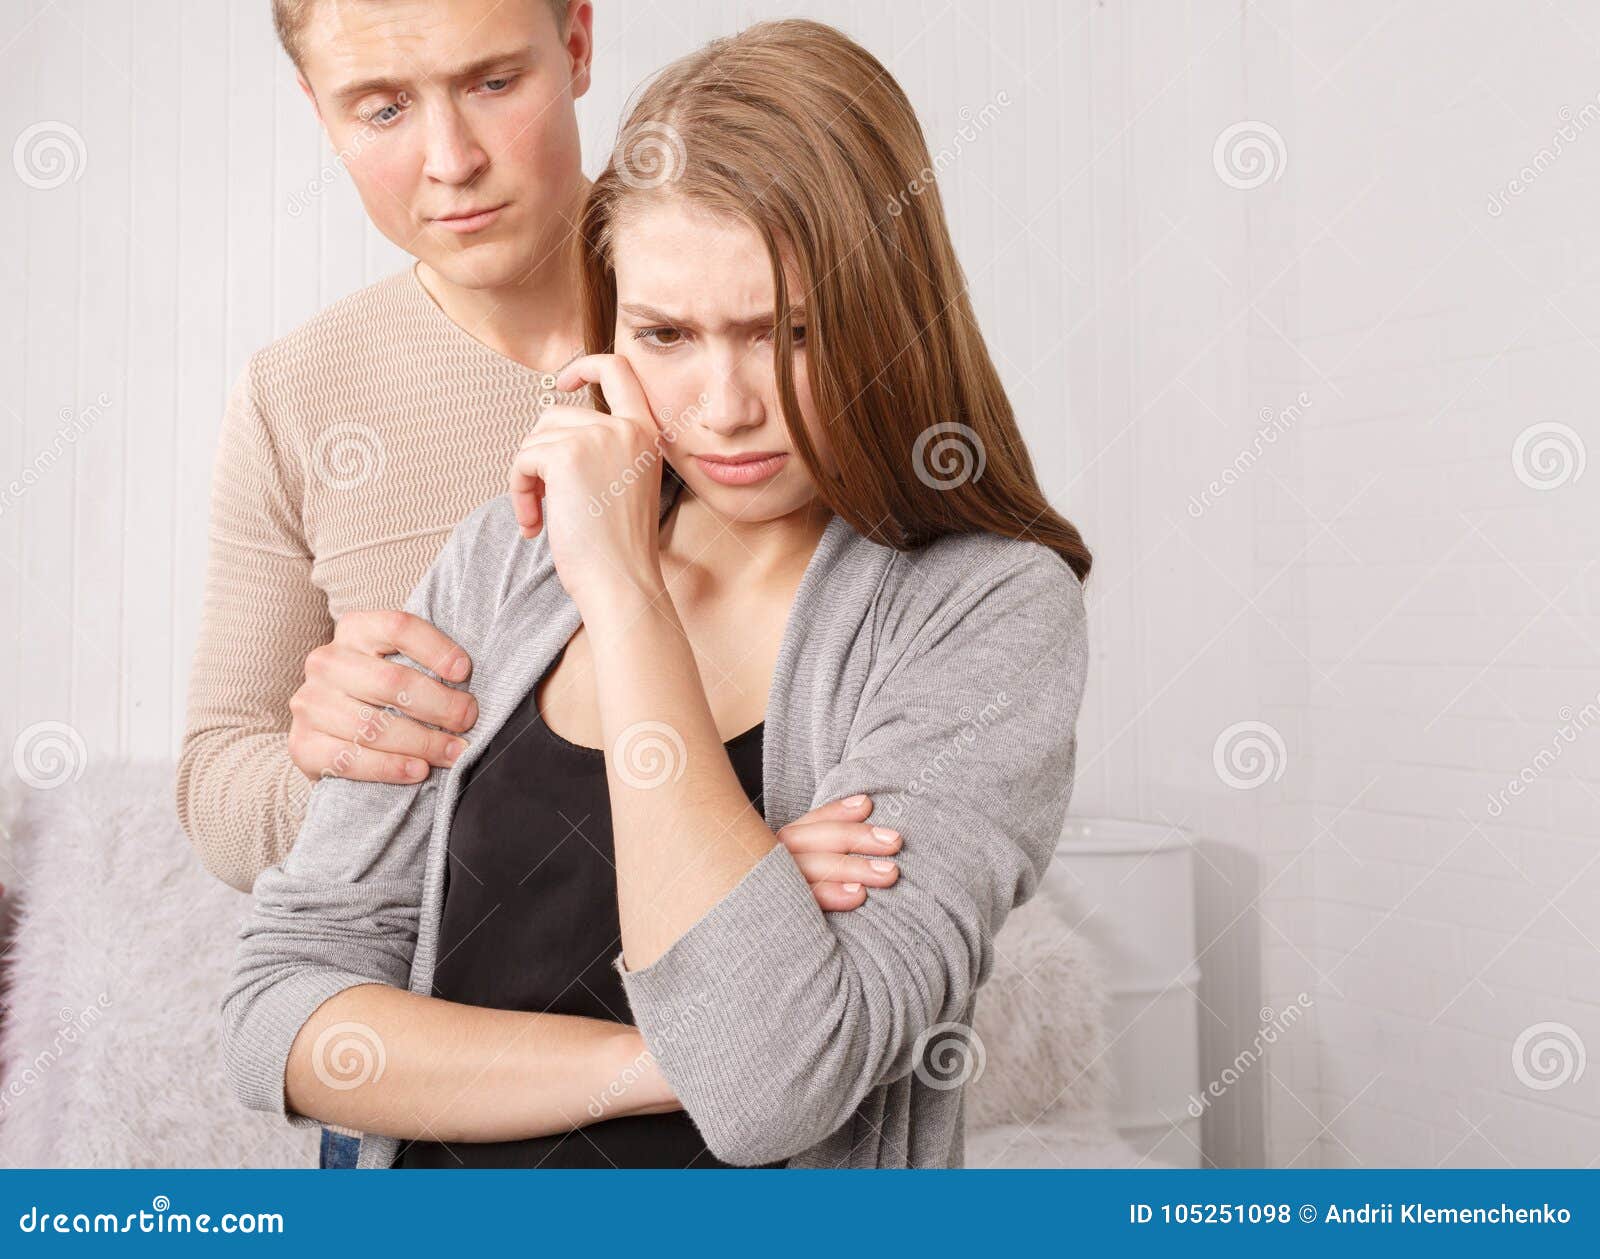 A Guy Holding an Injured Girl by the Shoulder Stock Photo - Image of ...